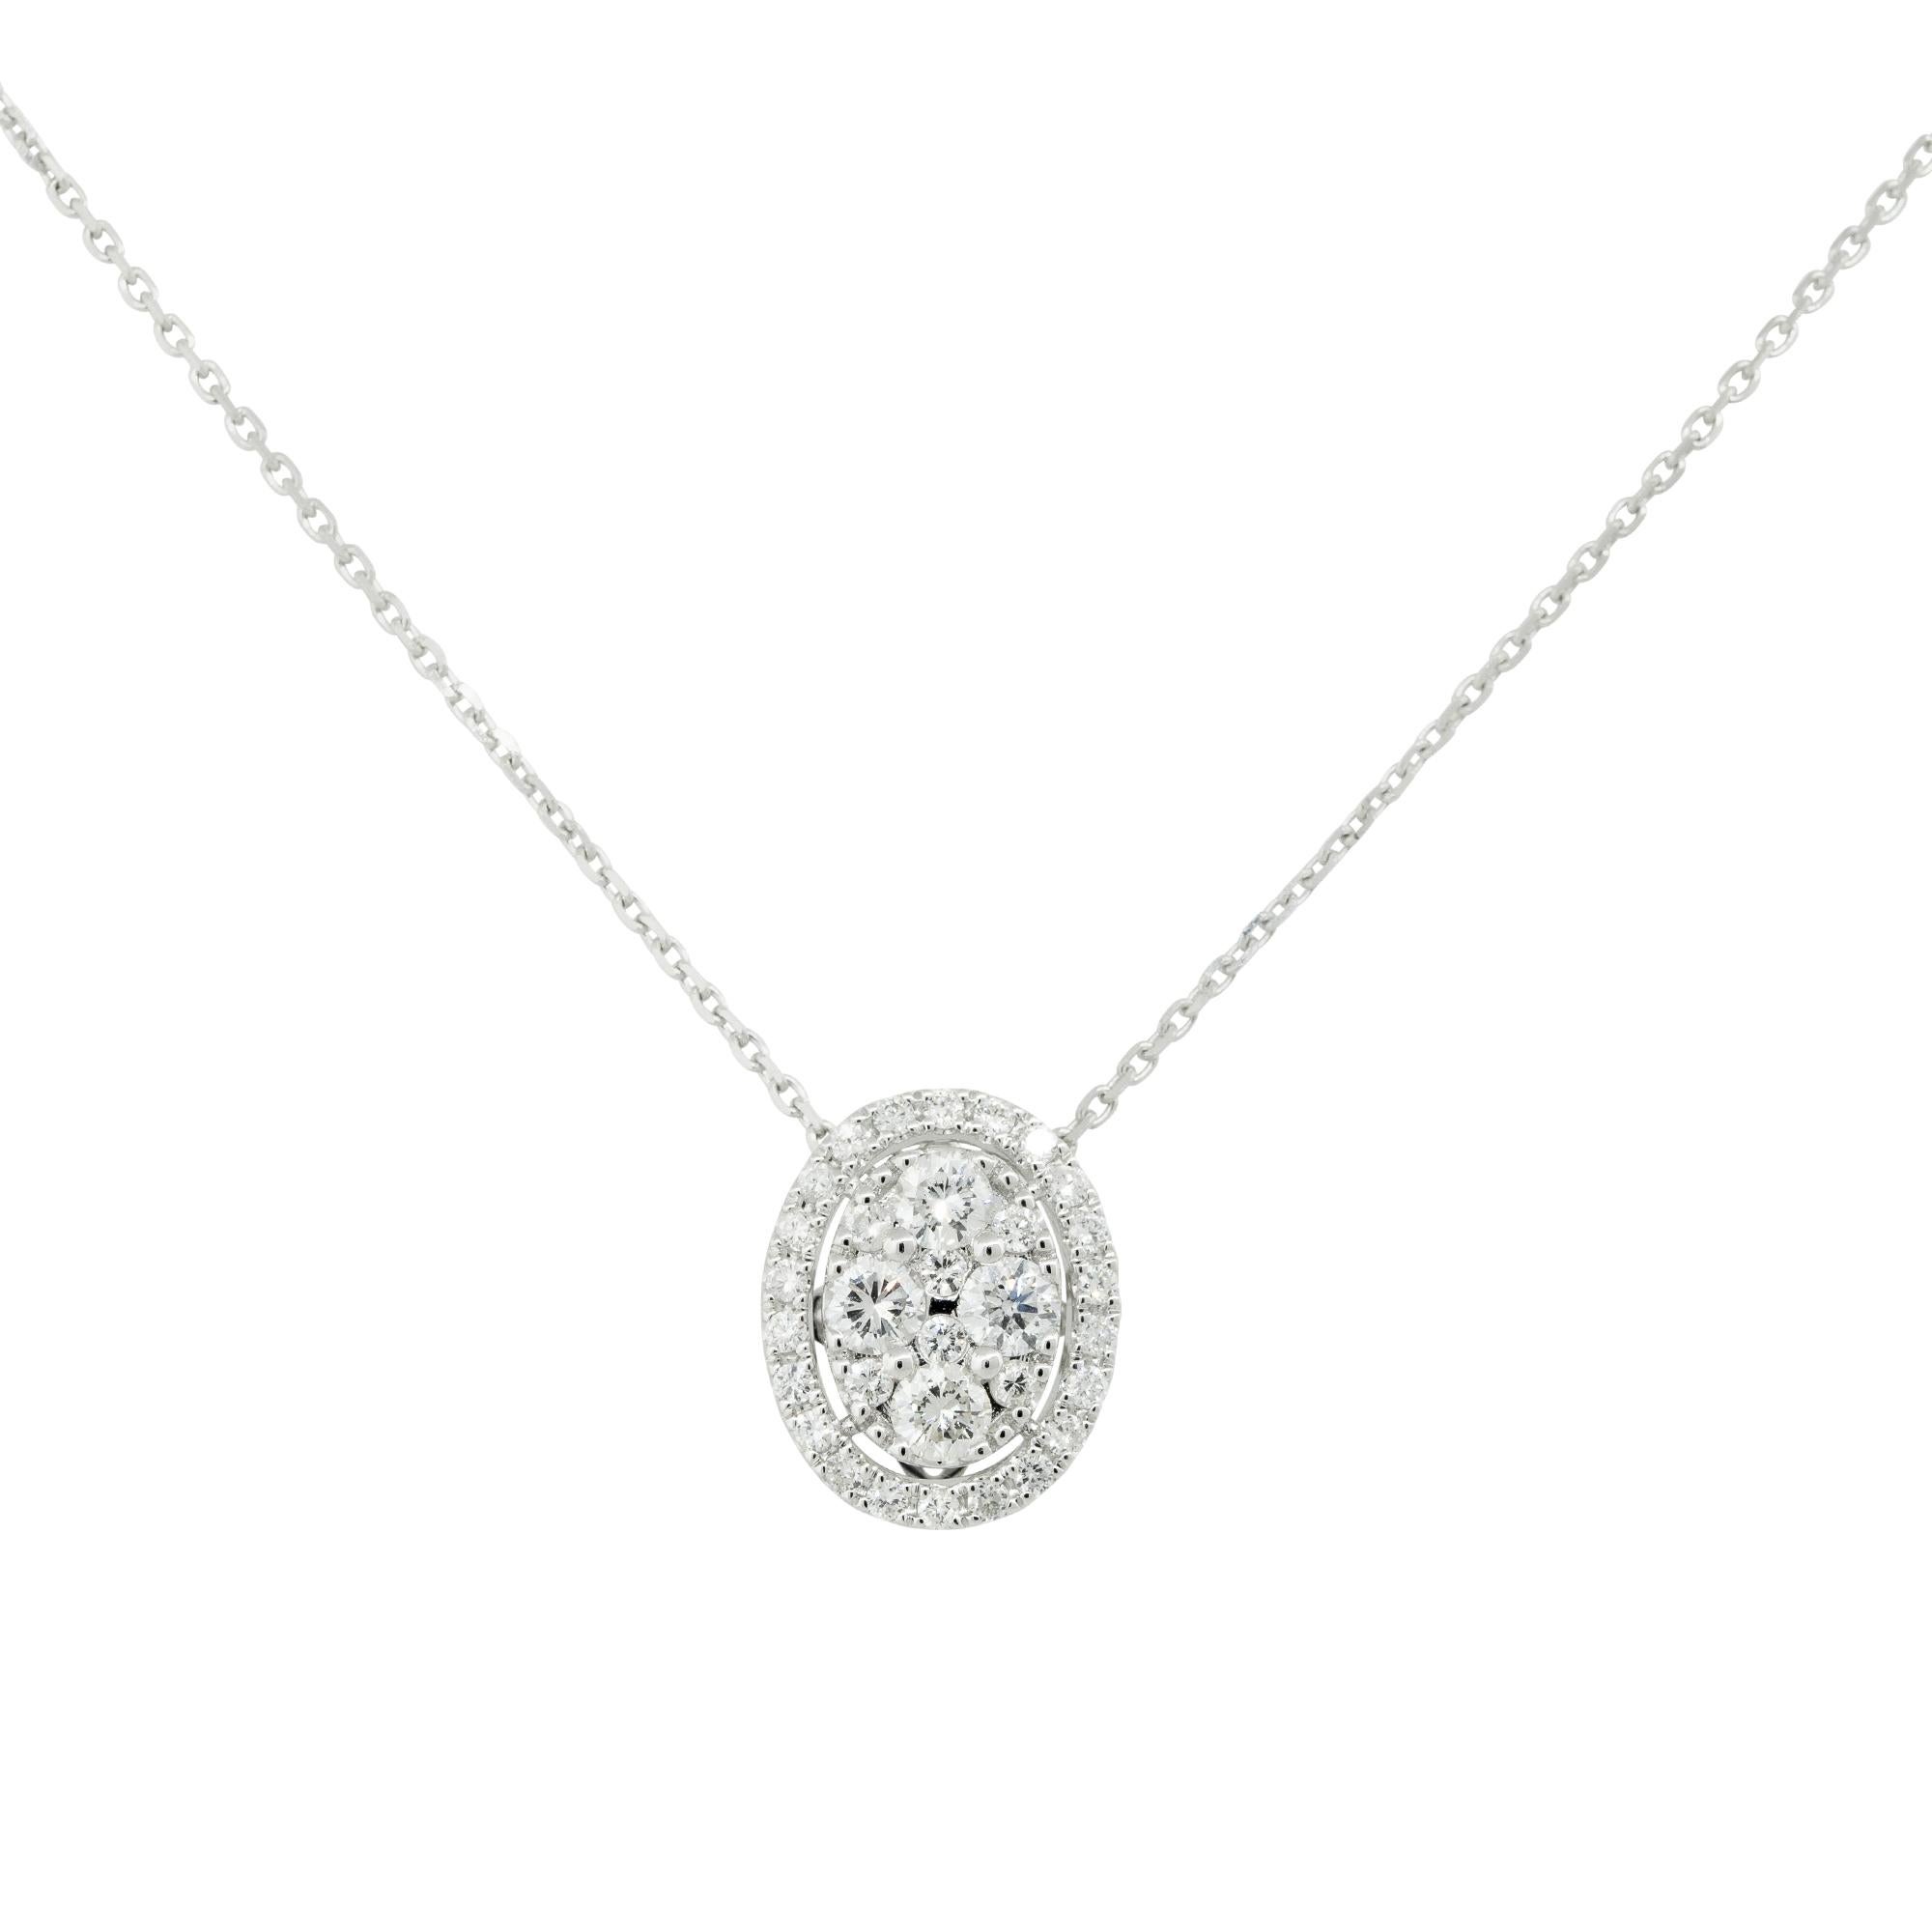 18k White Gold 0.85ctw Pave Diamond Oval Shaped Pendant Necklace
Material: 18k White Gold
Diamond Details: Approximately 0.85ctw of Round Brilliant cut Diamonds. The pendant has 4 larger diamonds in the center along with smaller diamonds in the